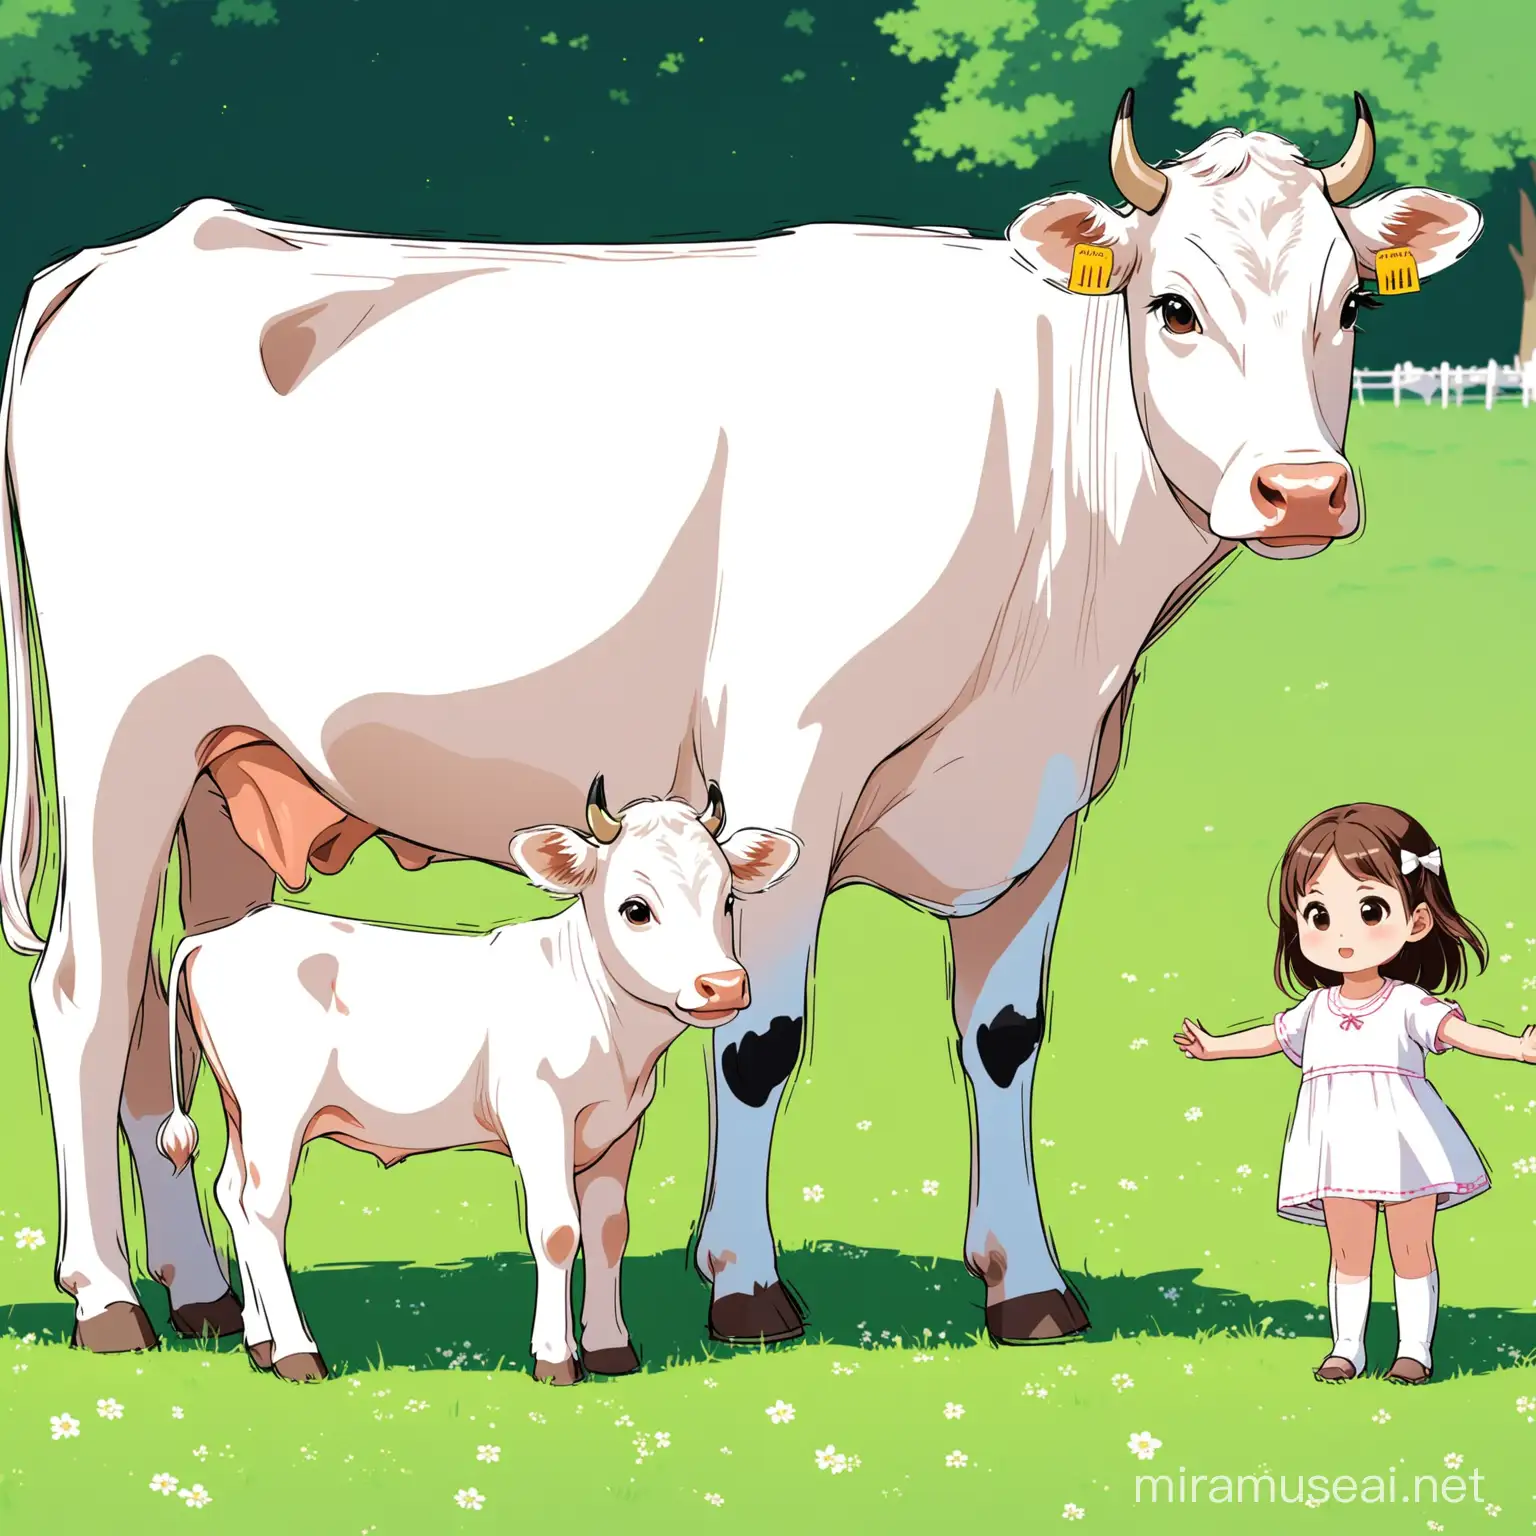 Adorable Scene Two White Cows and a Small Girl in Animated Harmony